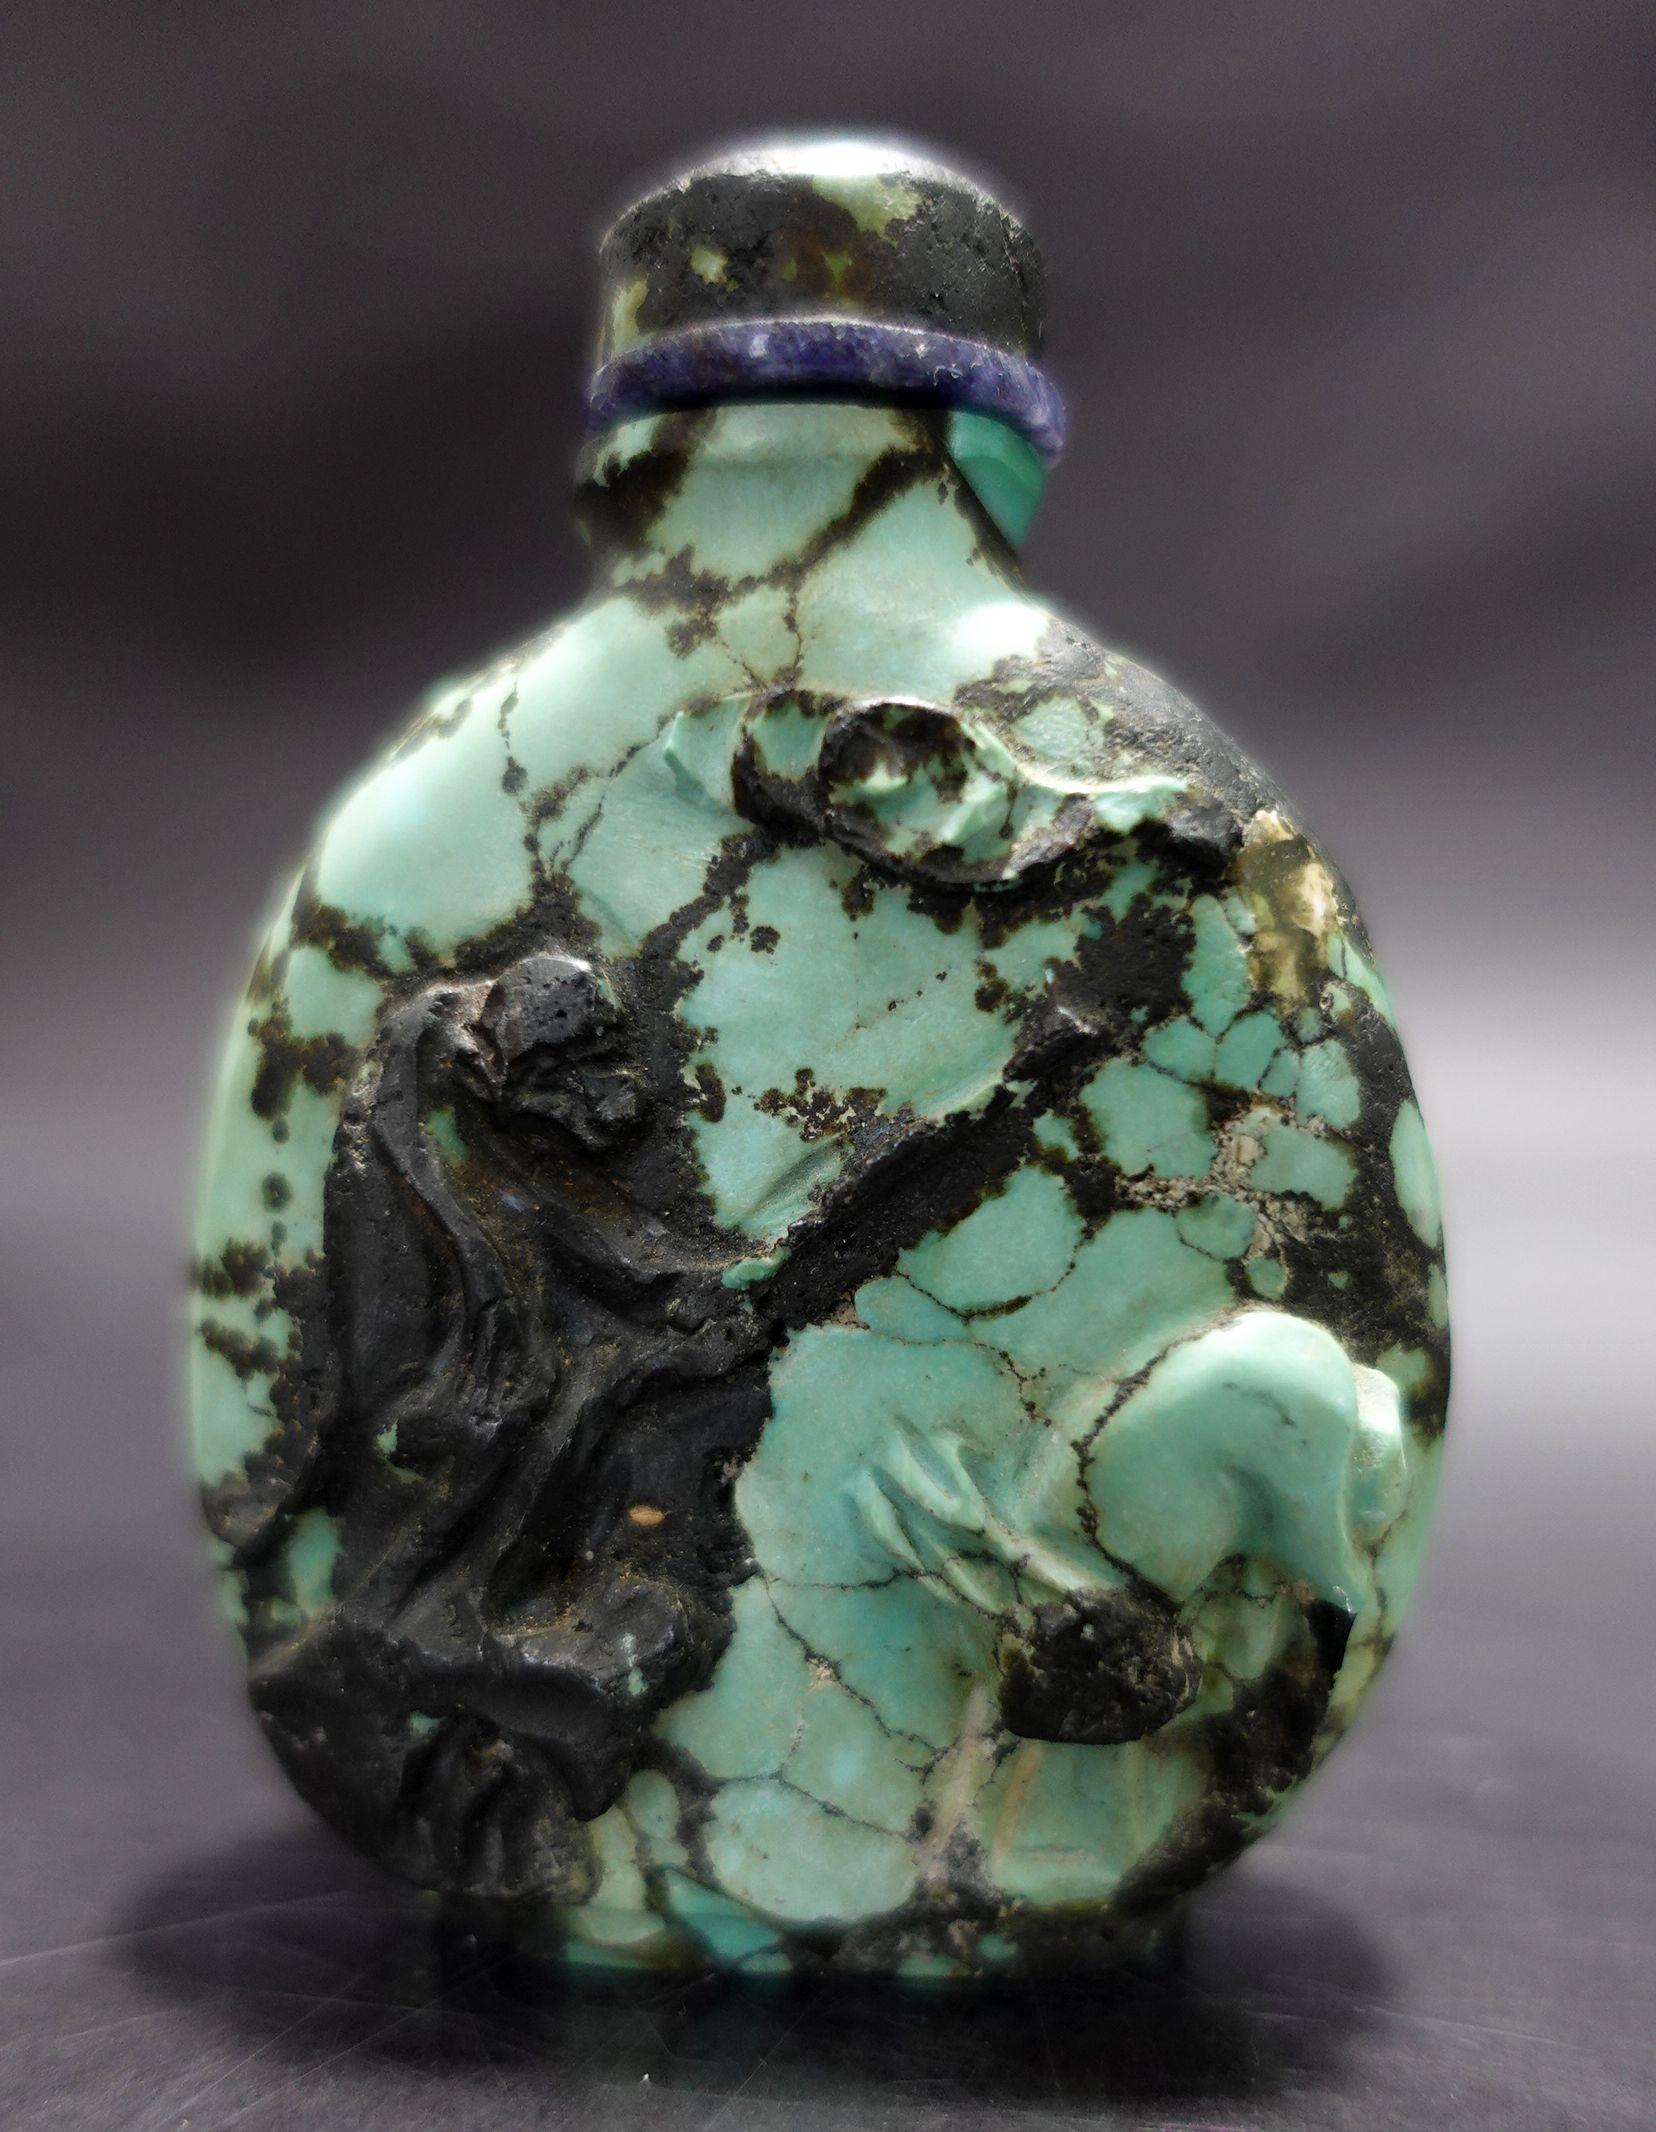 Turquoise snuff bottle. China. 19th century. Tibetan turquoise in hematite matrix. Surface carved with monkeys and mythical animals. Well hollowed. Matching stopper. 2.5in H.
A very unique selection of the highest quality turquoise and heavy feeling